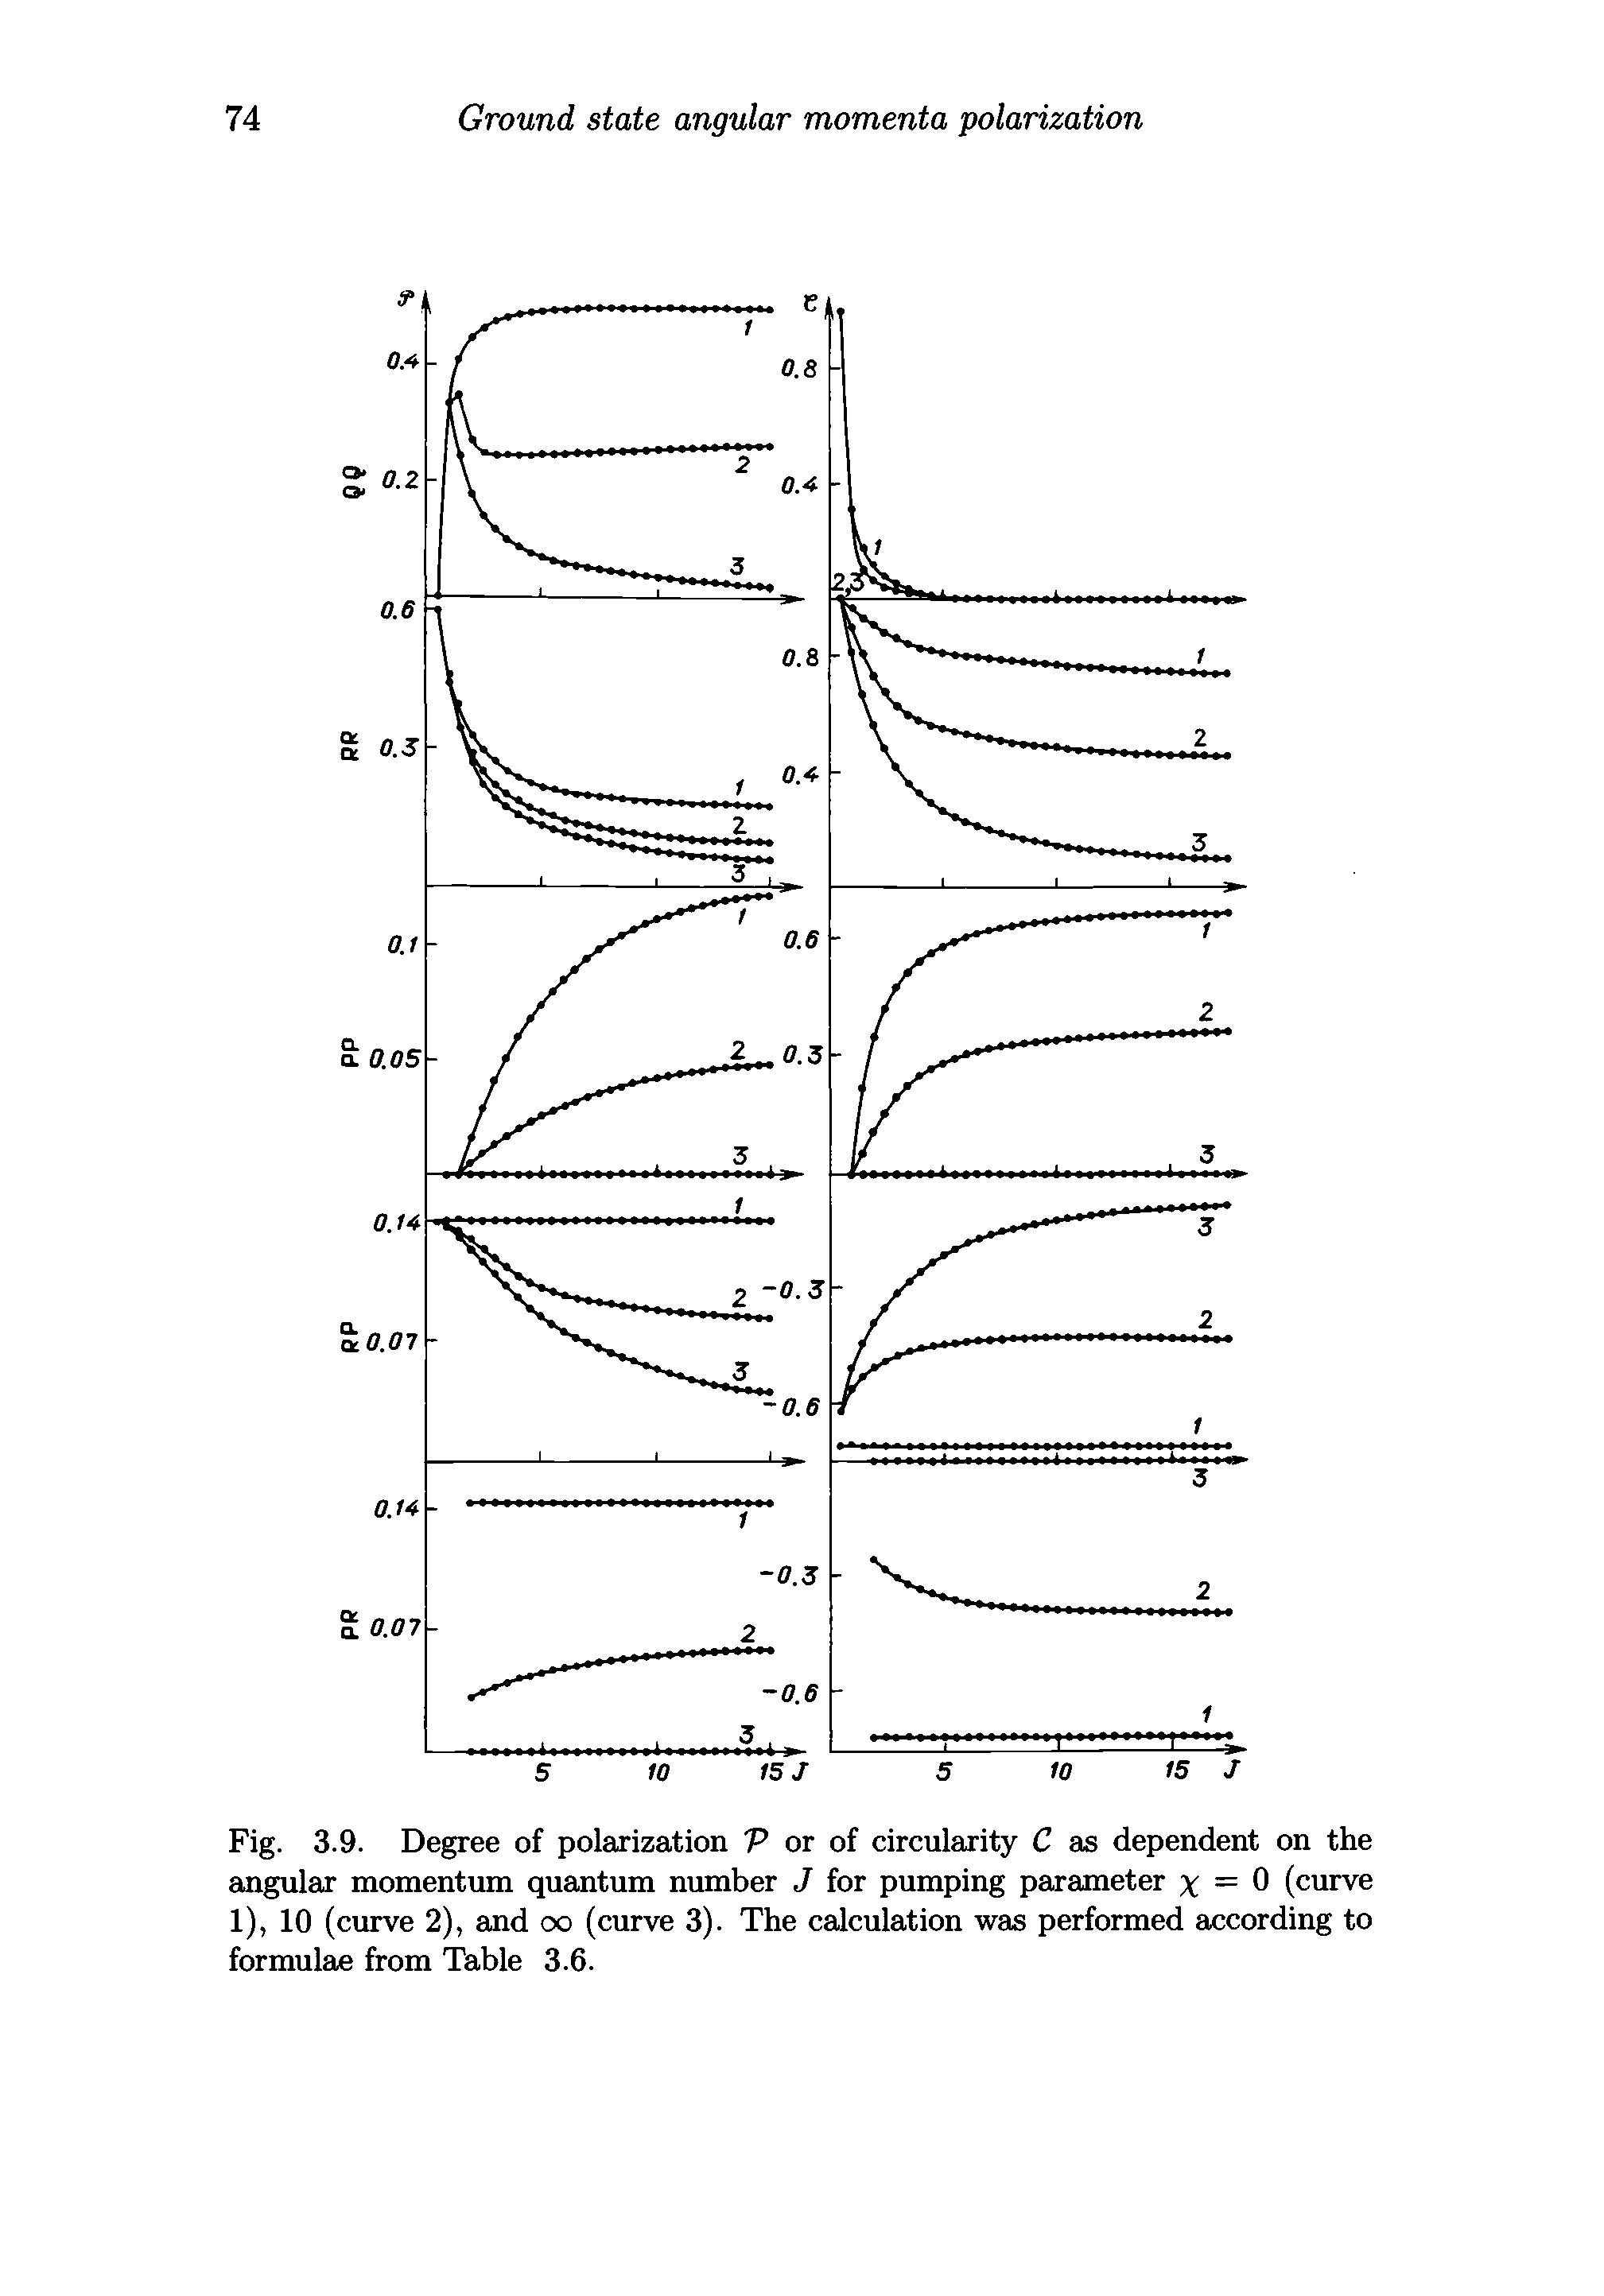 Fig. 3.9. Degree of polarization V or of circularity C as dependent on the angular momentum quantum number J for pumping parameter x = 0 (curve 1), 10 (curve 2), and oo (curve 3). The calculation was performed according to formulae from Table 3.6.